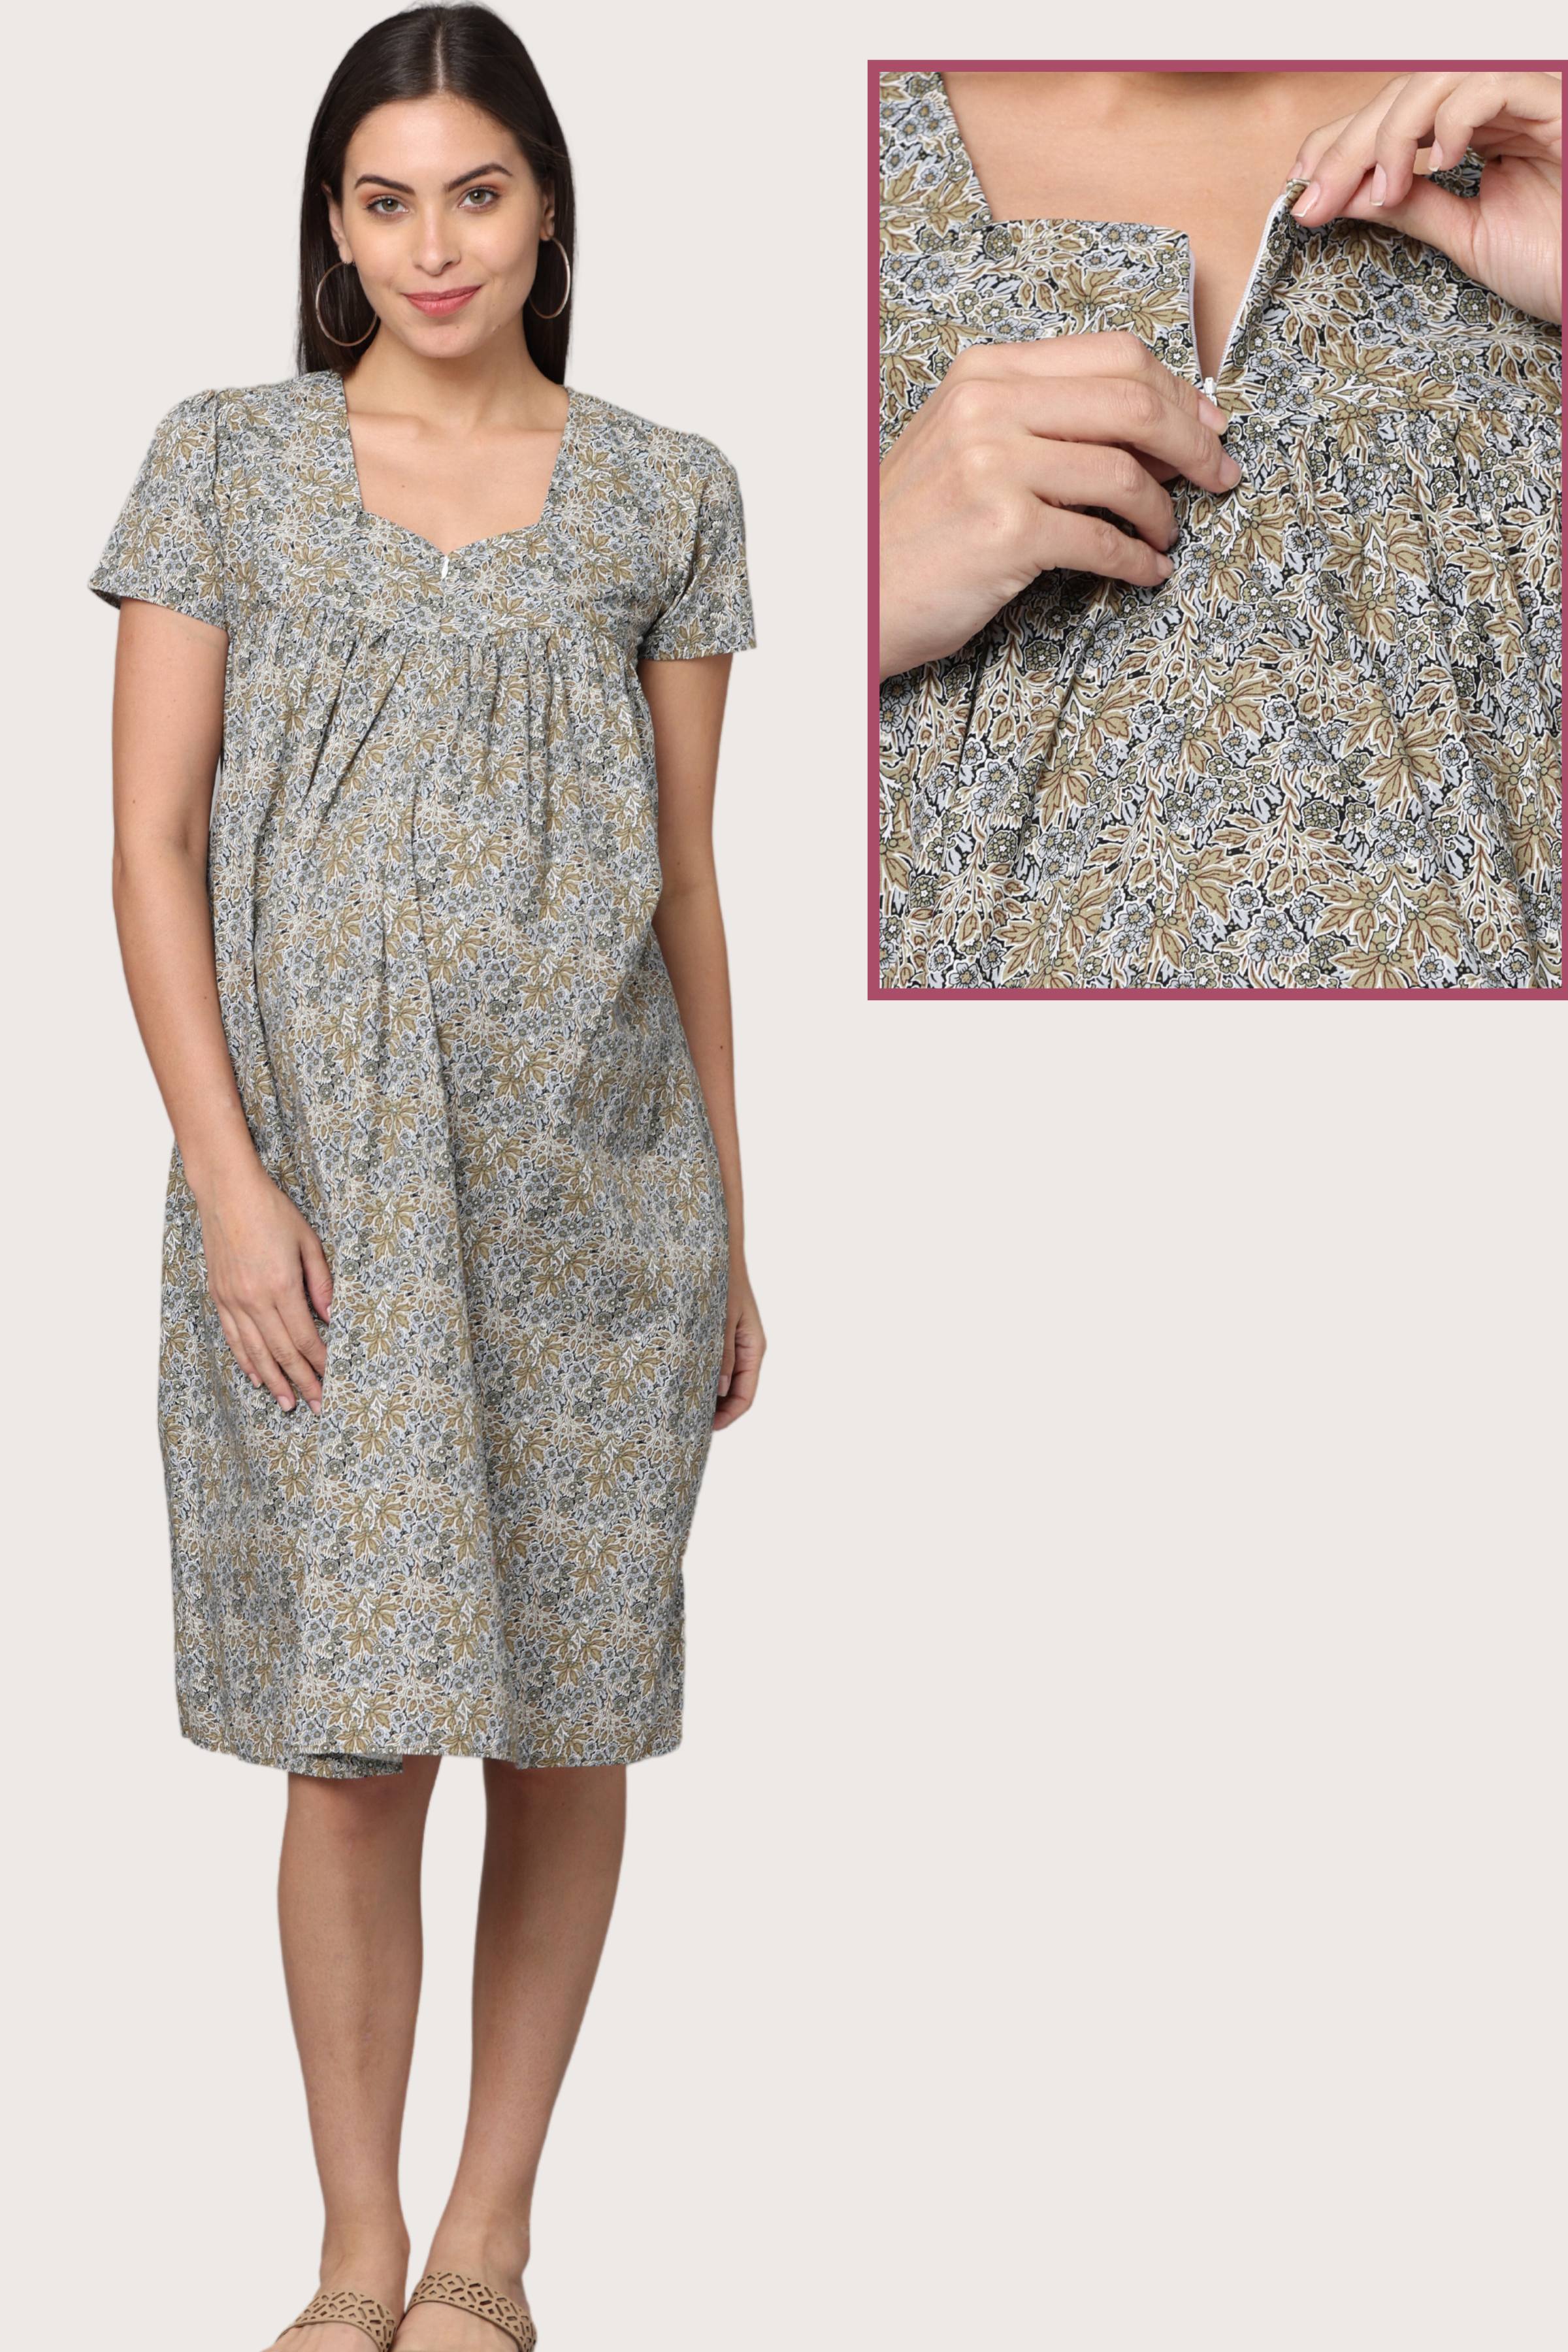 Buy maternity wear wholesale suppliers india : pregnancy wear kurtis at  wholesalecatalog.in